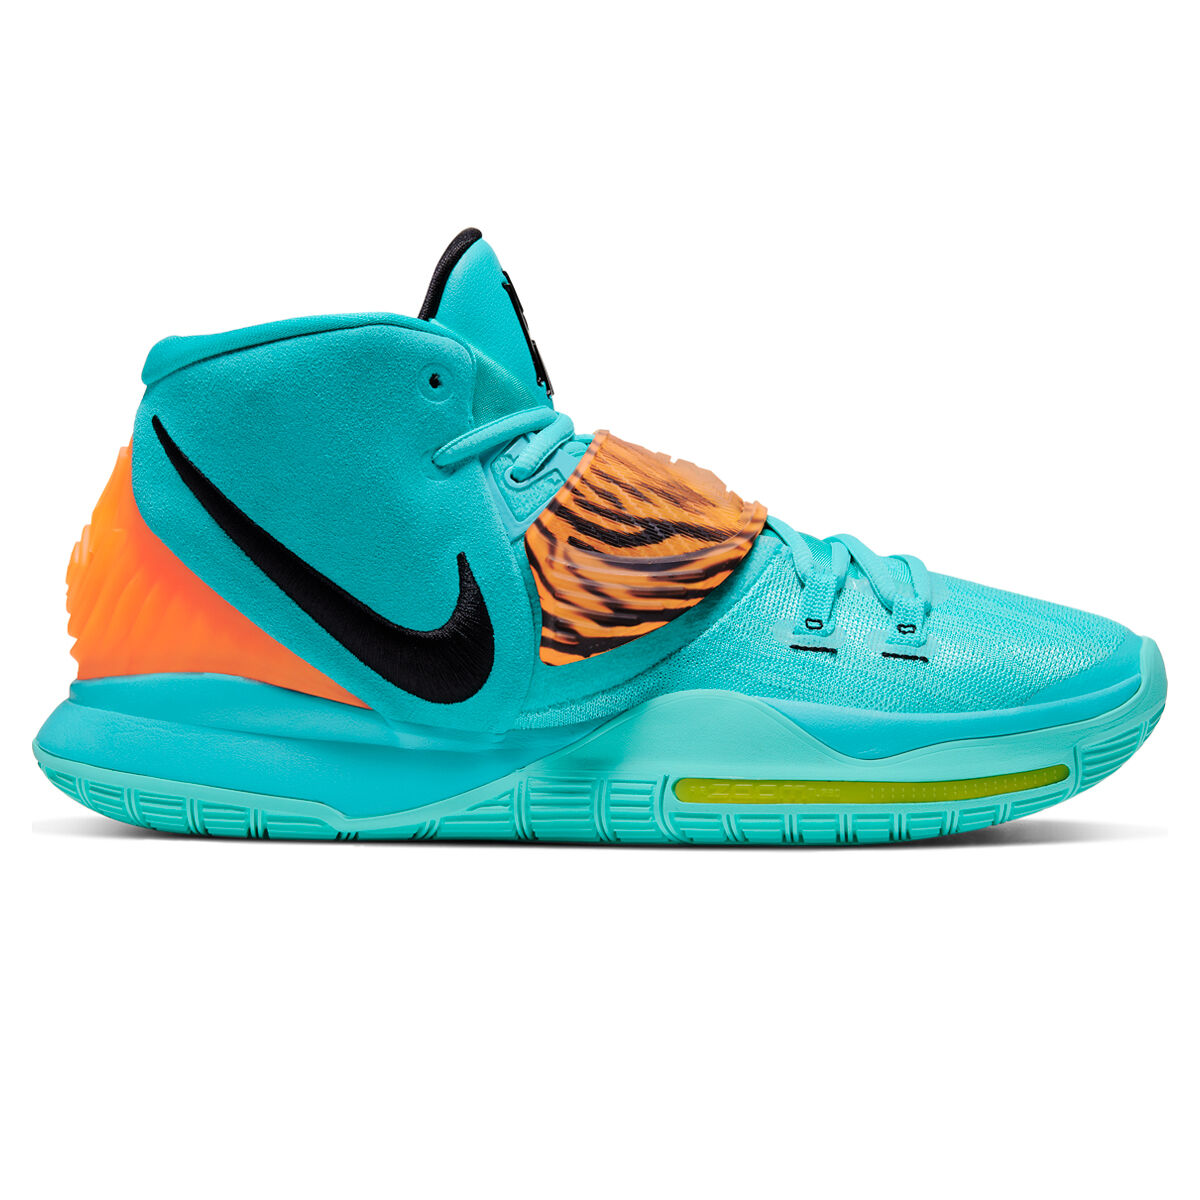 kyrie green shoes